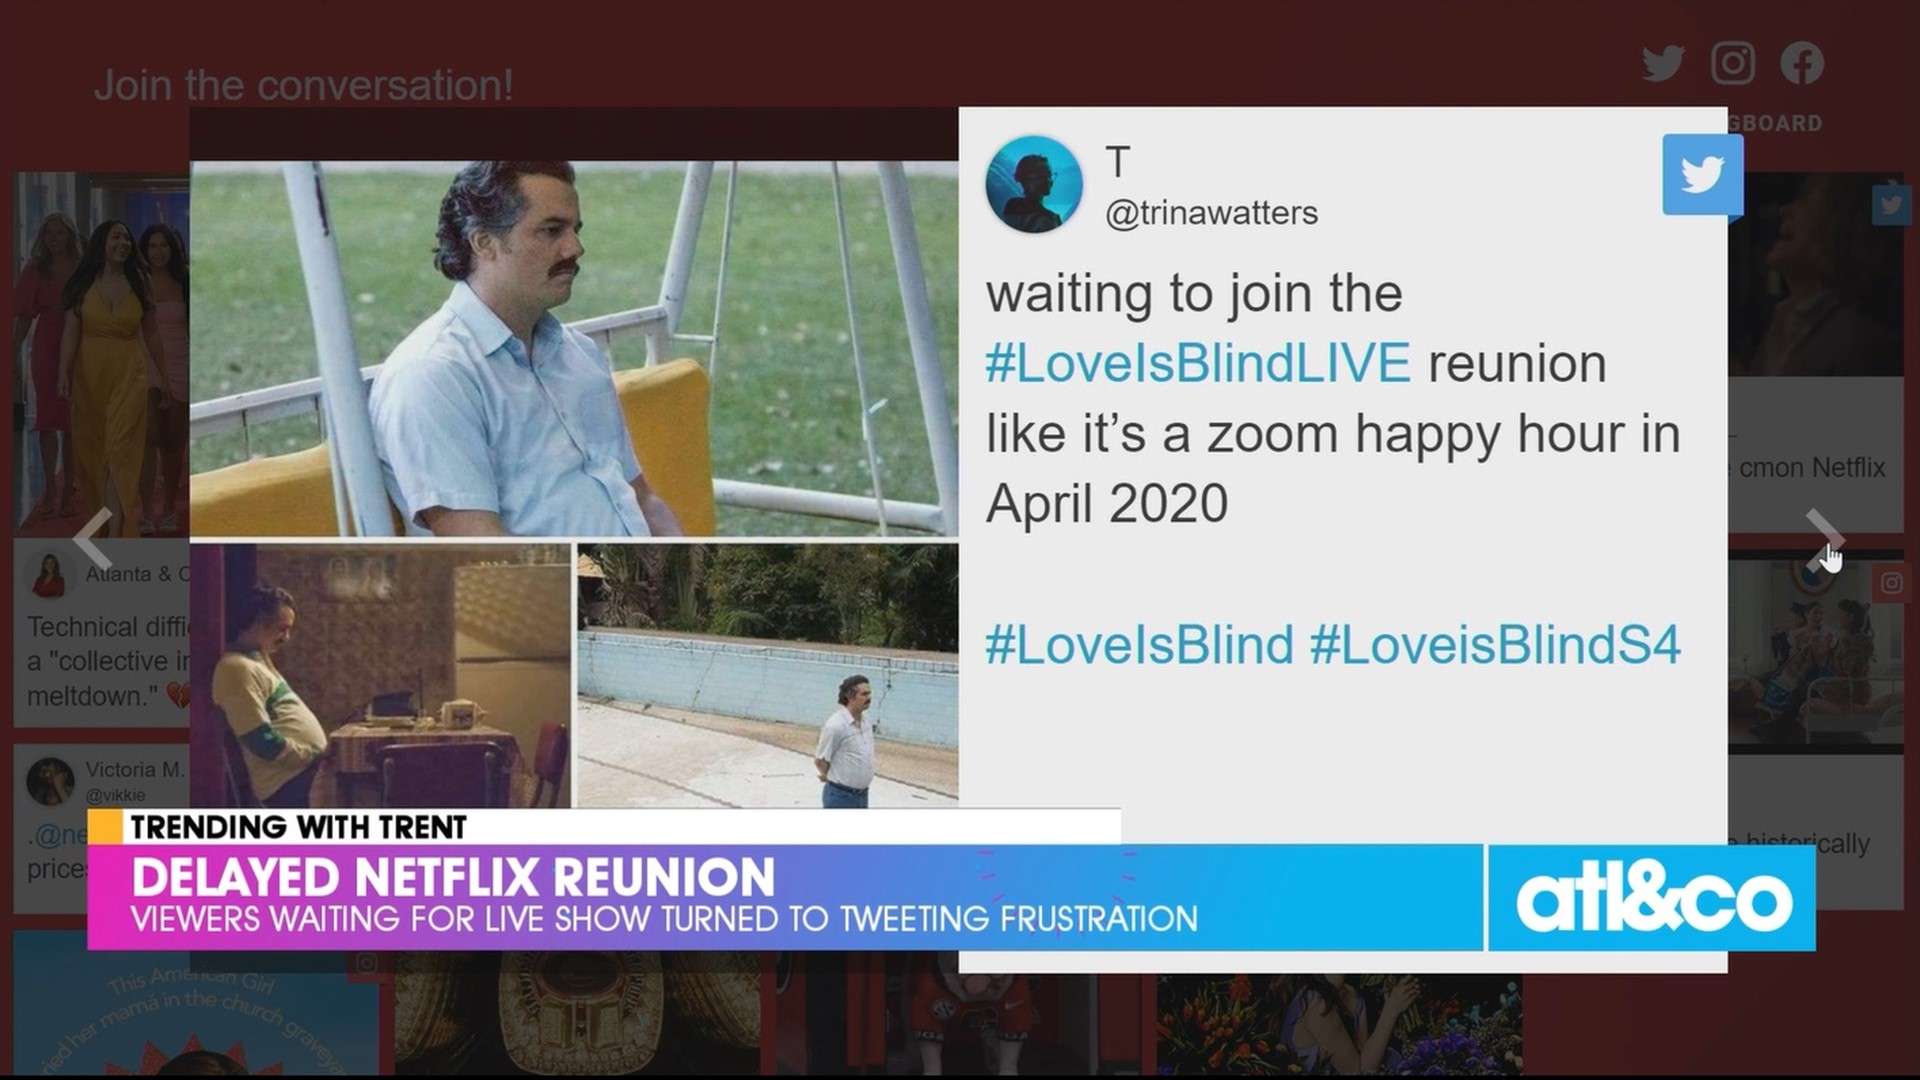 A major delay for Netflix's live reunion of 'Love Is Blind' caused quite the stir online Sunday night.